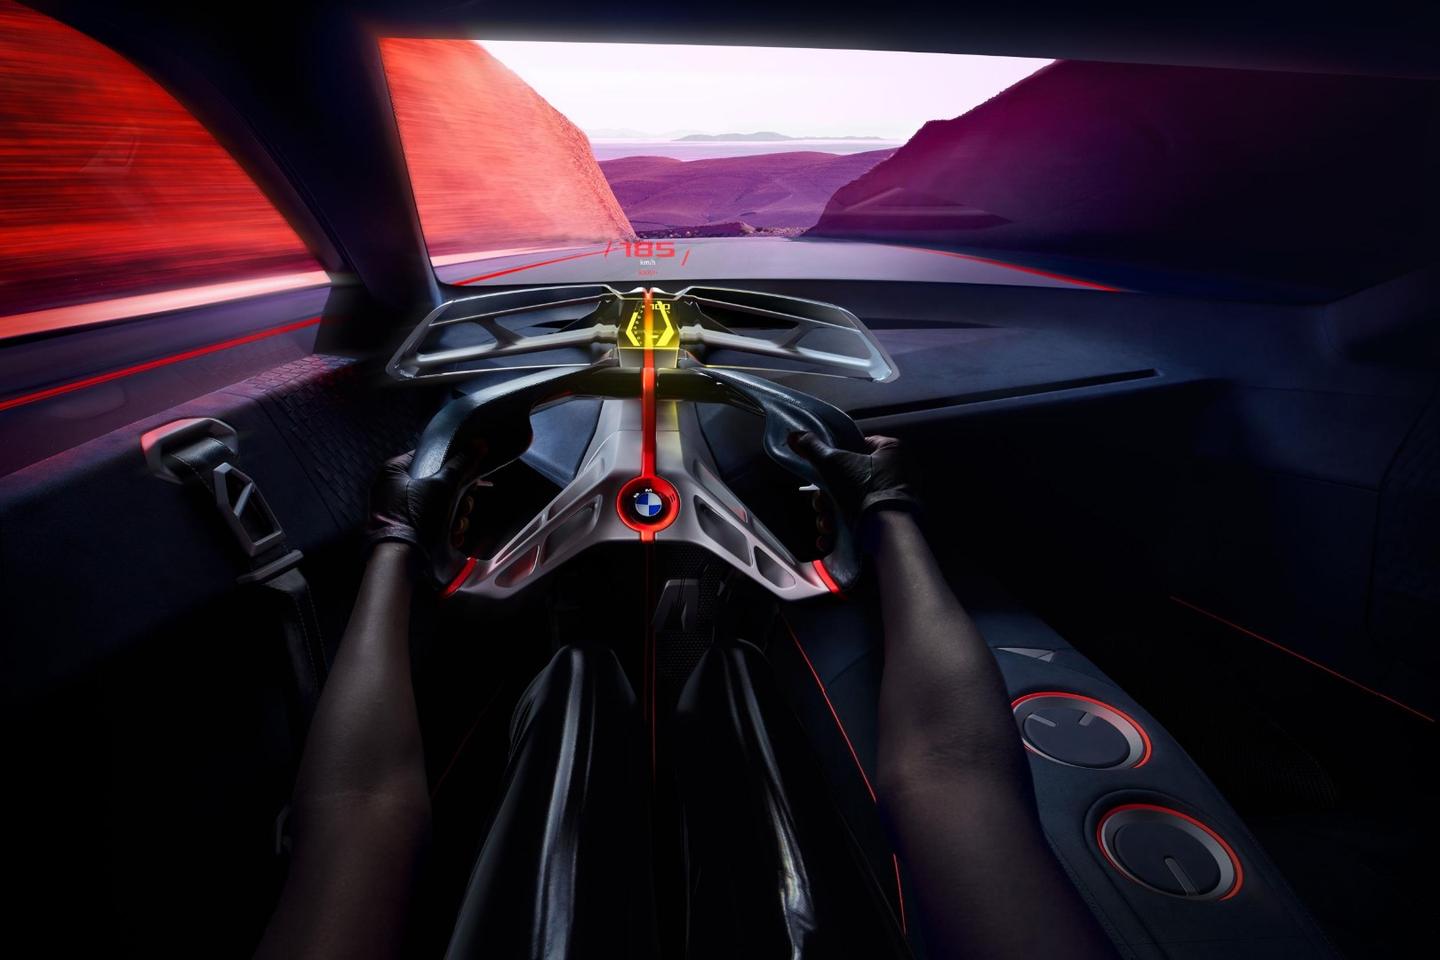 The "Boost Pod" features a three-layer interface with head-up display, hovering instrument displays and sporty steering wheel